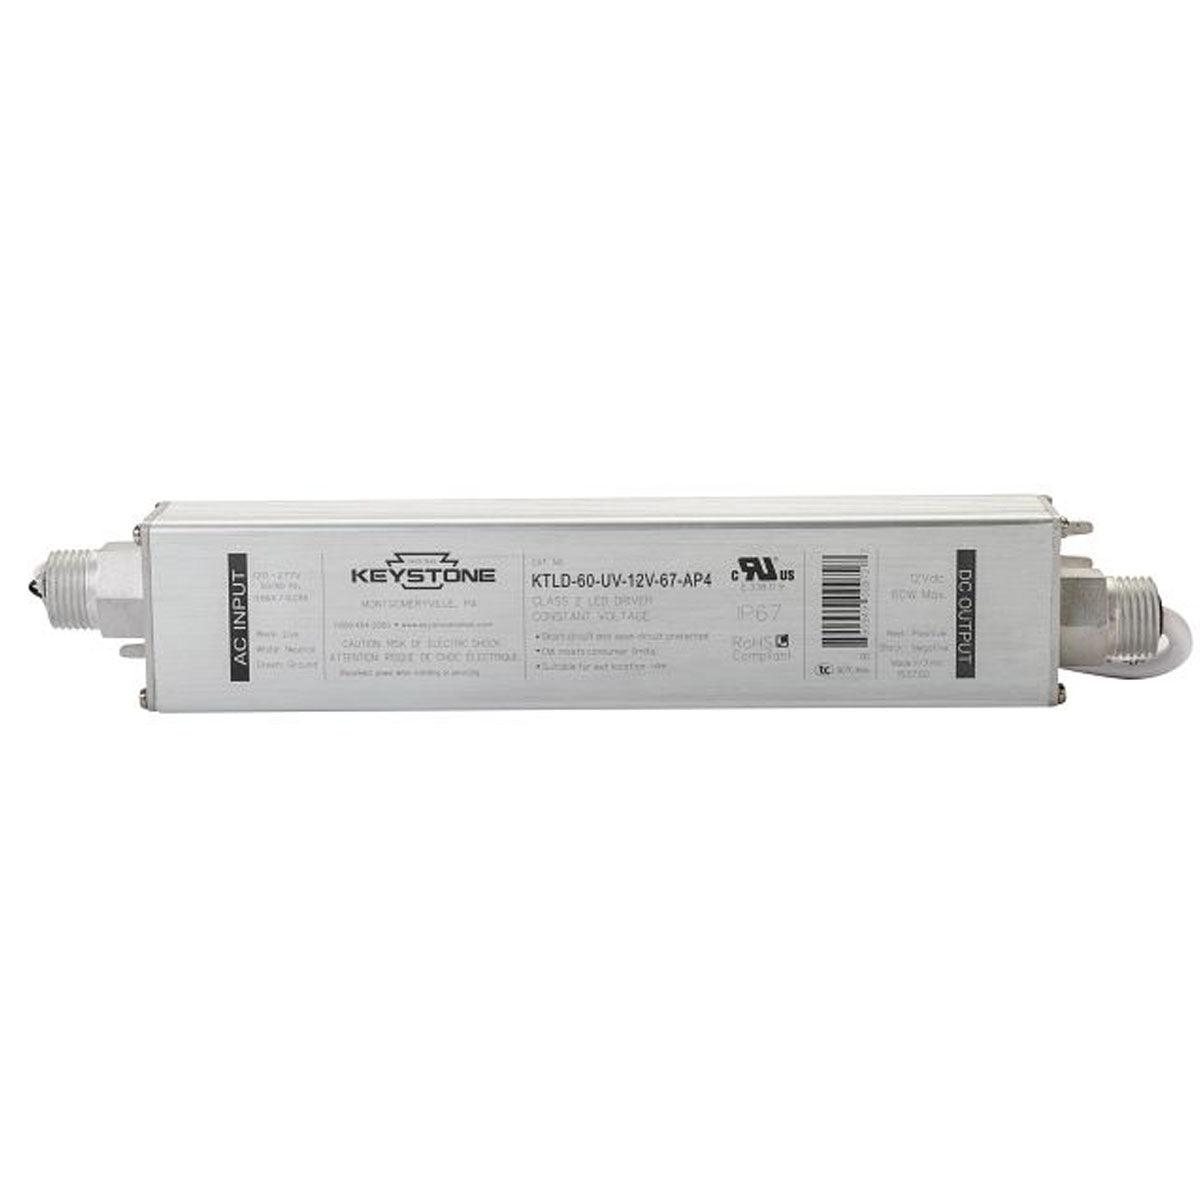 60 Watts, 12VDC Class 2 Constant Voltage LED Diver, 120-277V Input, IP67 Rated